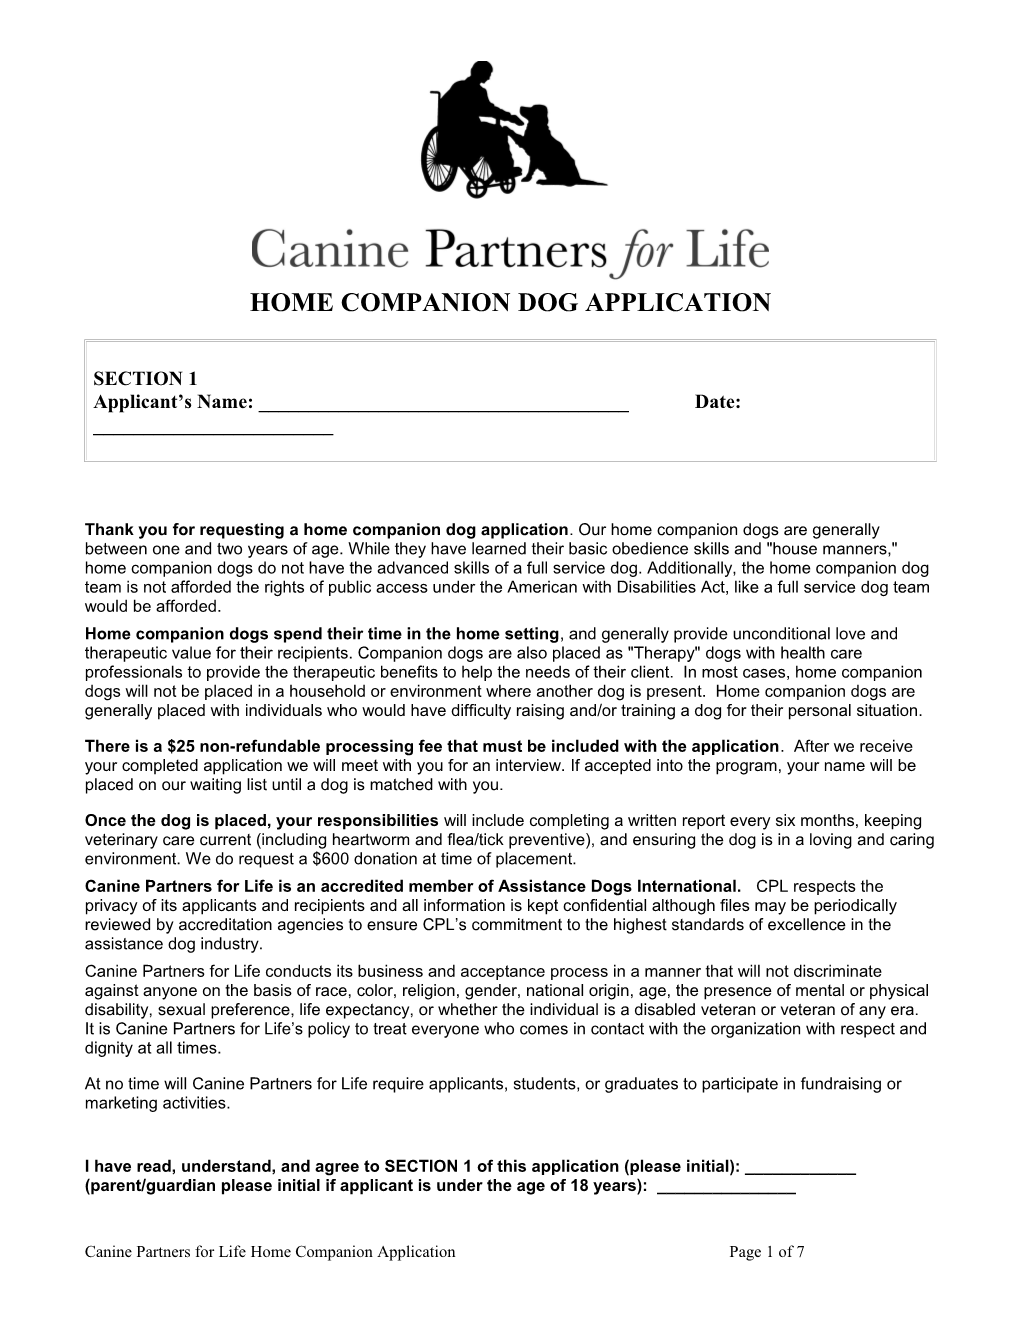 Canine Partners for Life